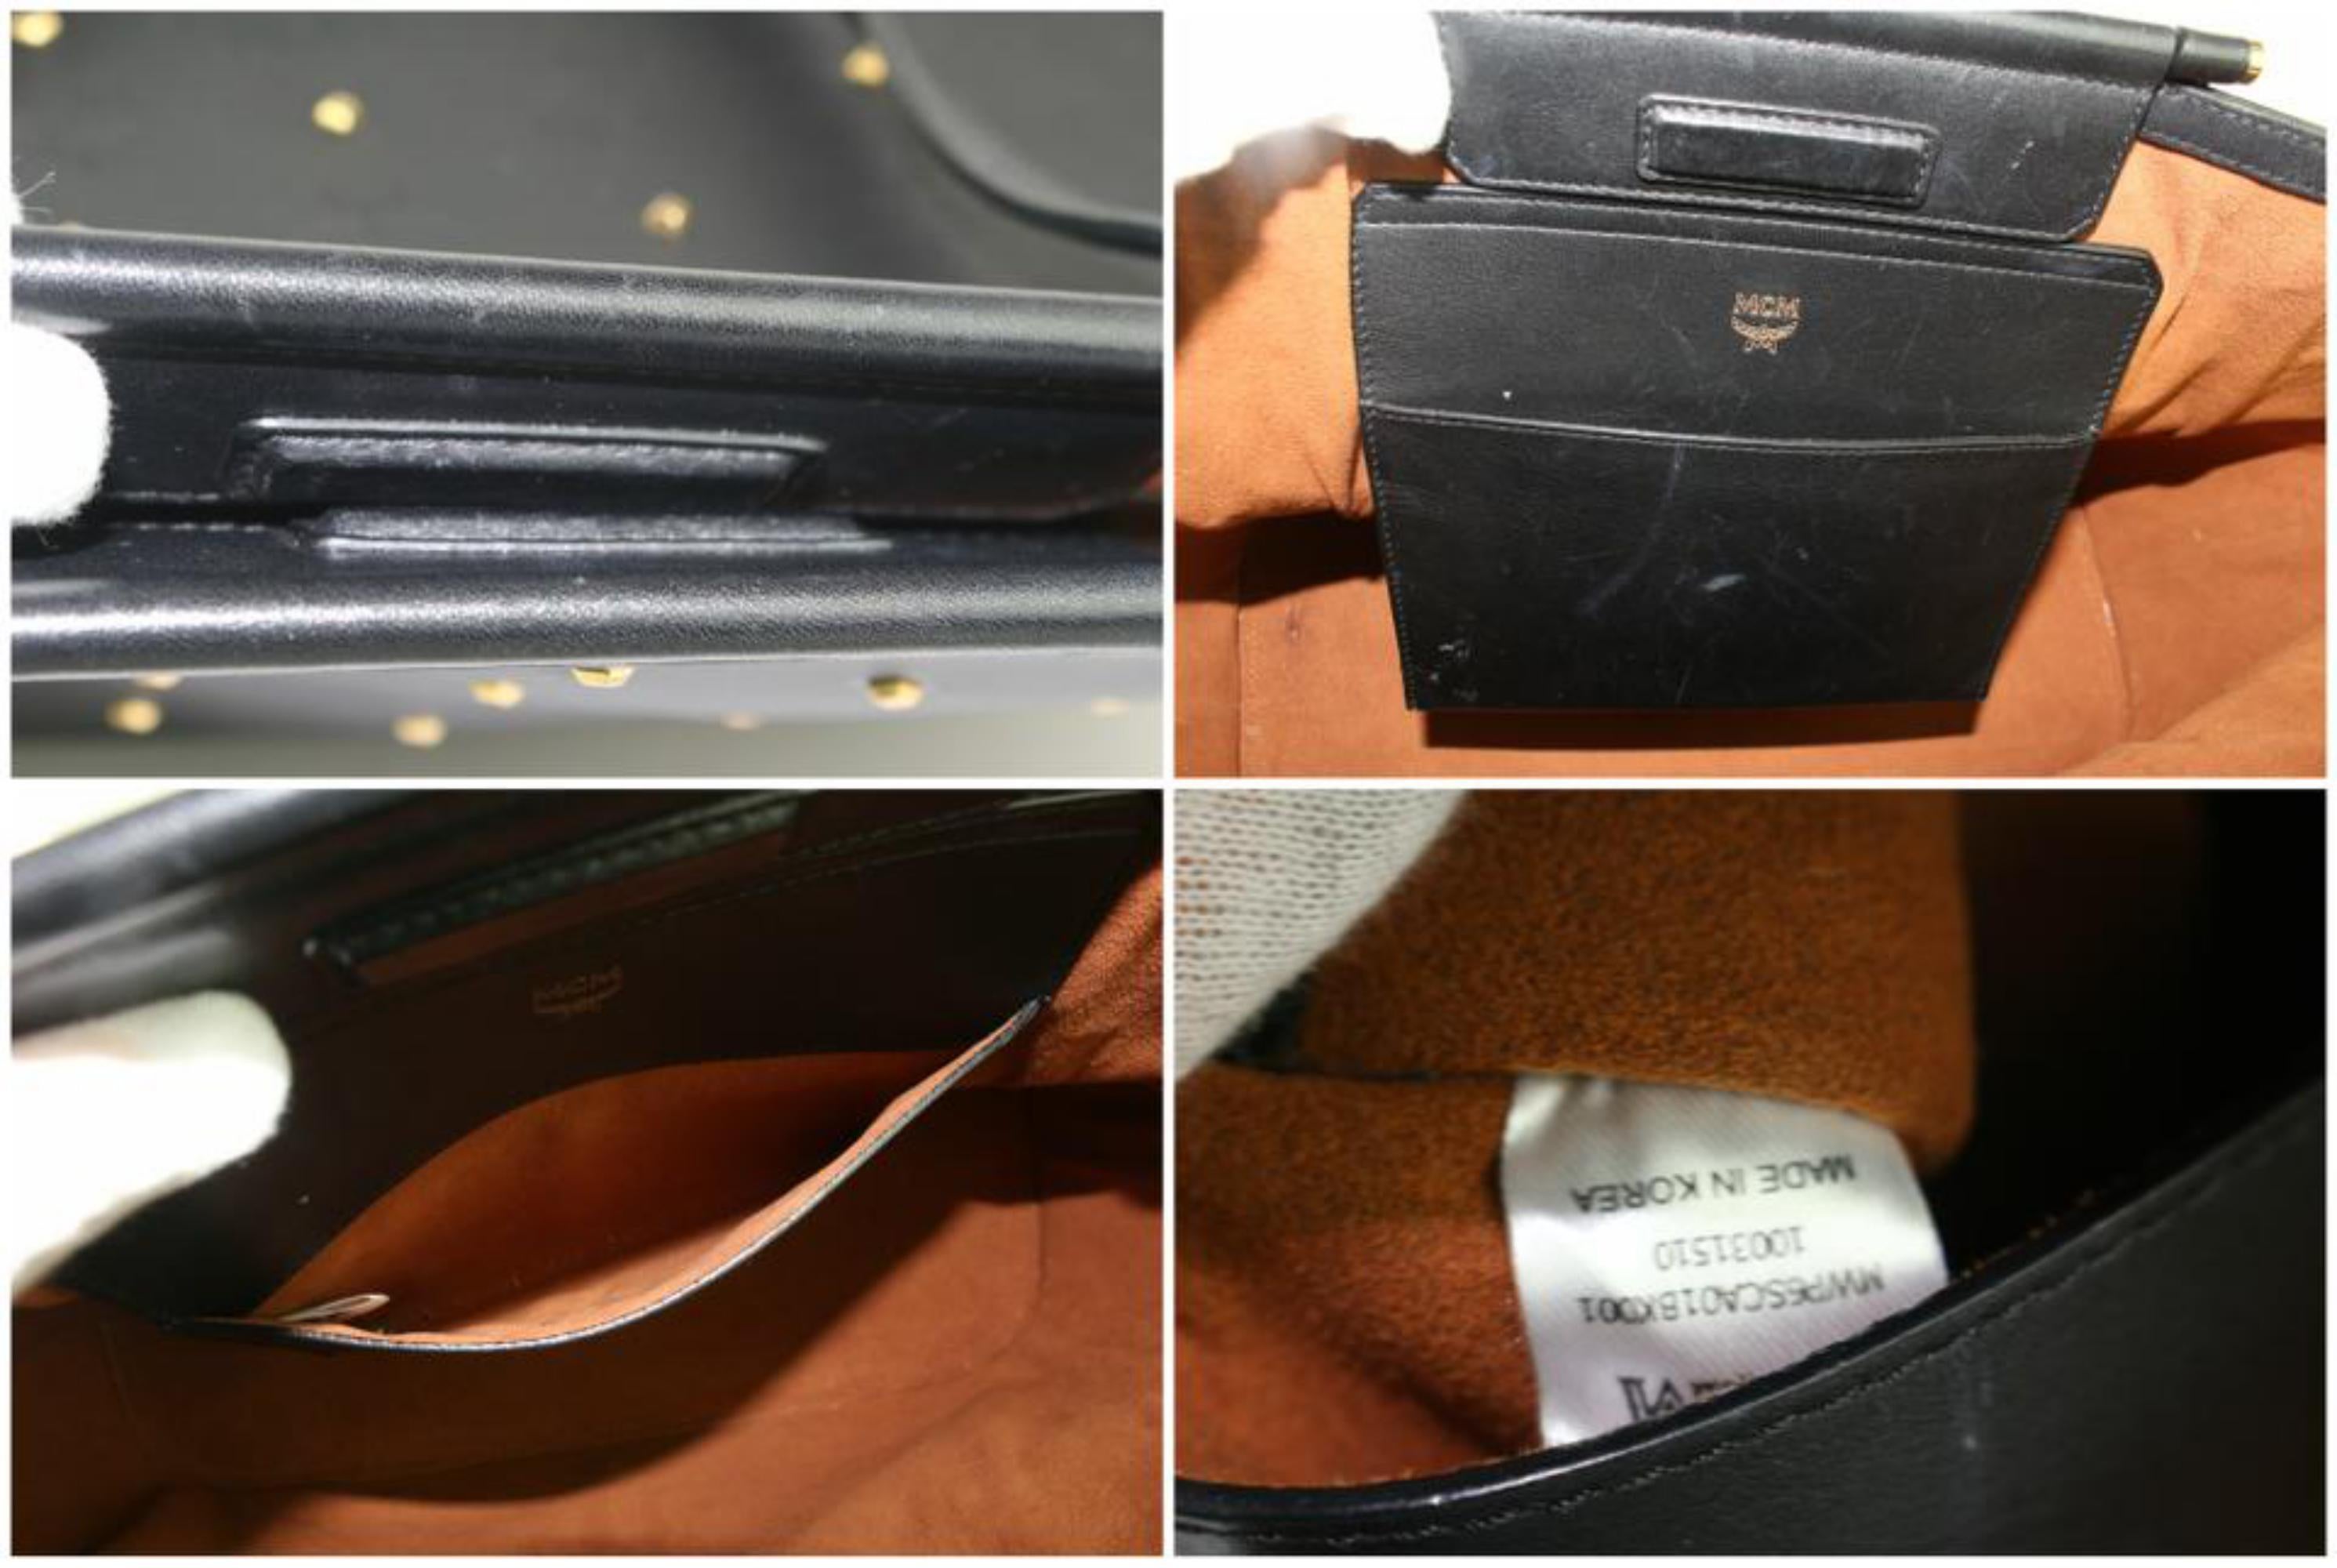 MCM Claudia Studs 14mcz1106 Black Leather Tote In Excellent Condition For Sale In Forest Hills, NY